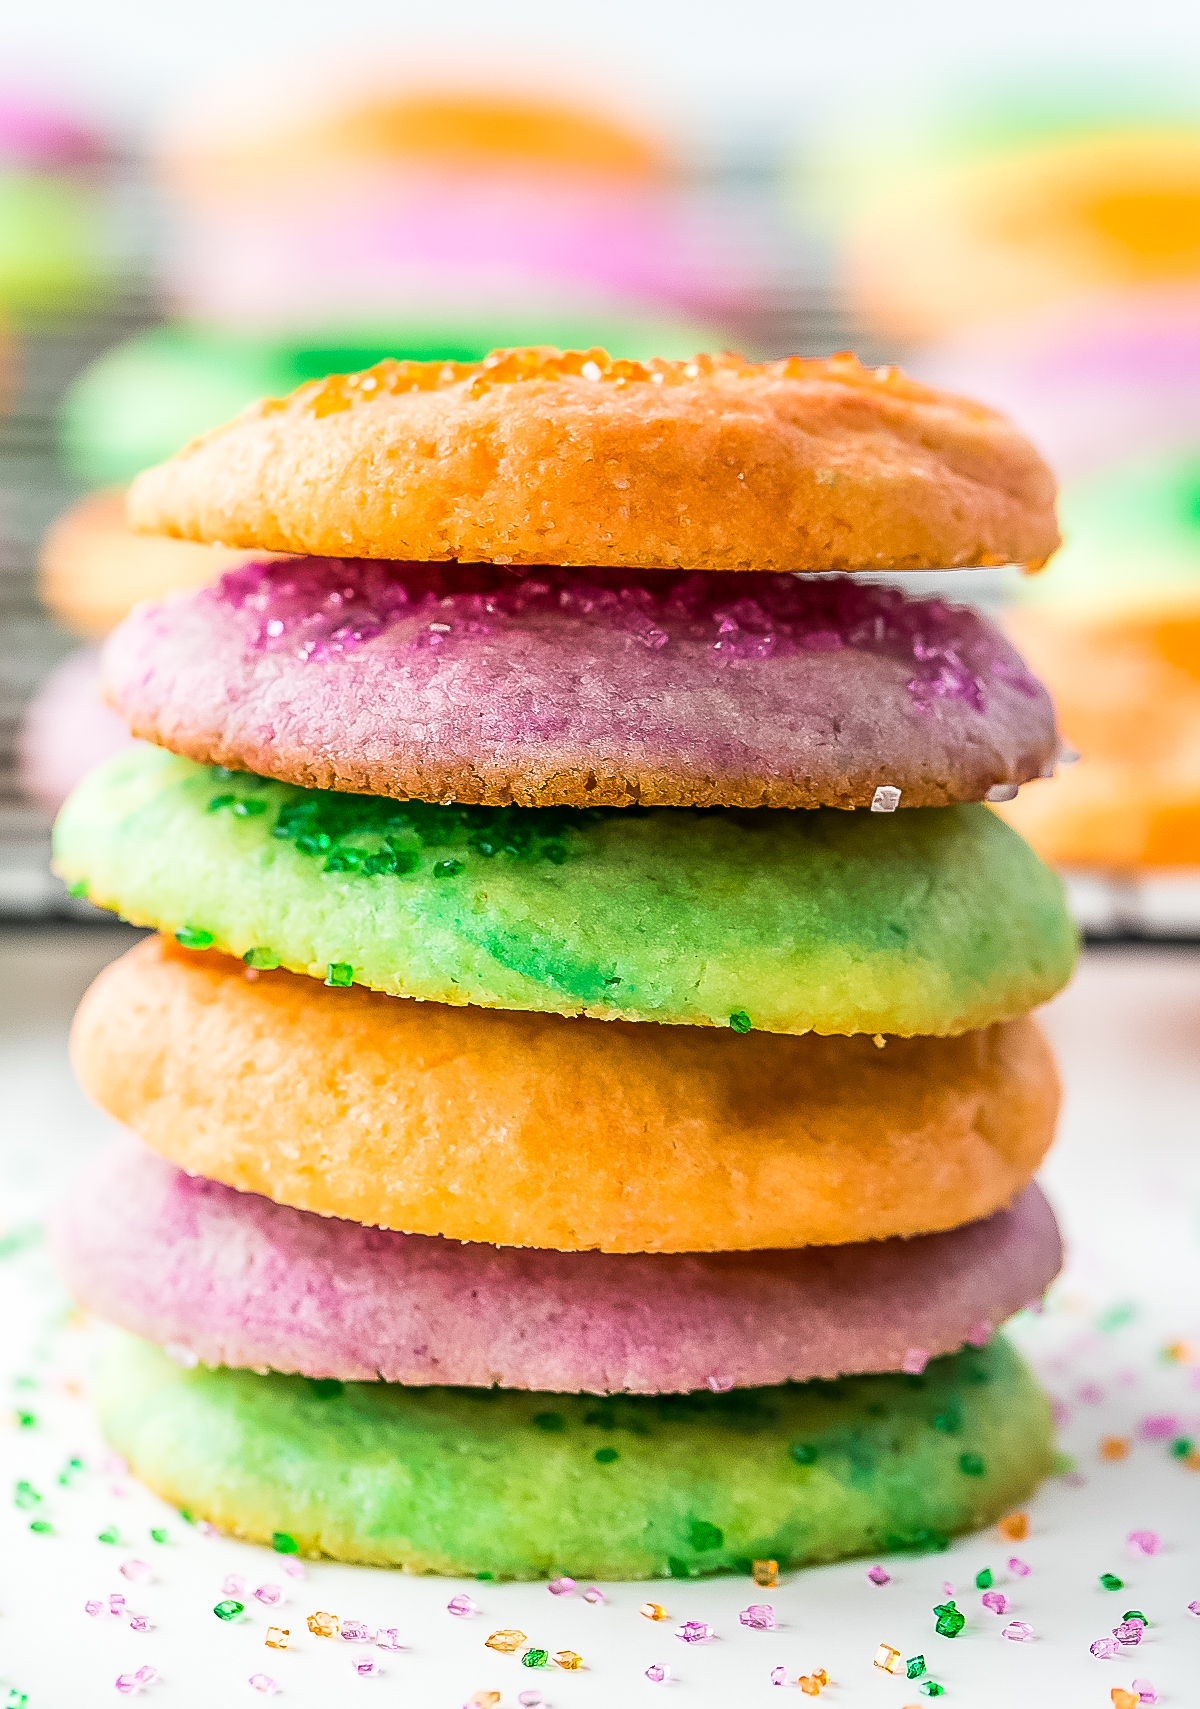 This recipe for Jello Cookies is a twist on a classic sugar cookie. These vibrant cookies are a fun retro treat that kids are sure to love!